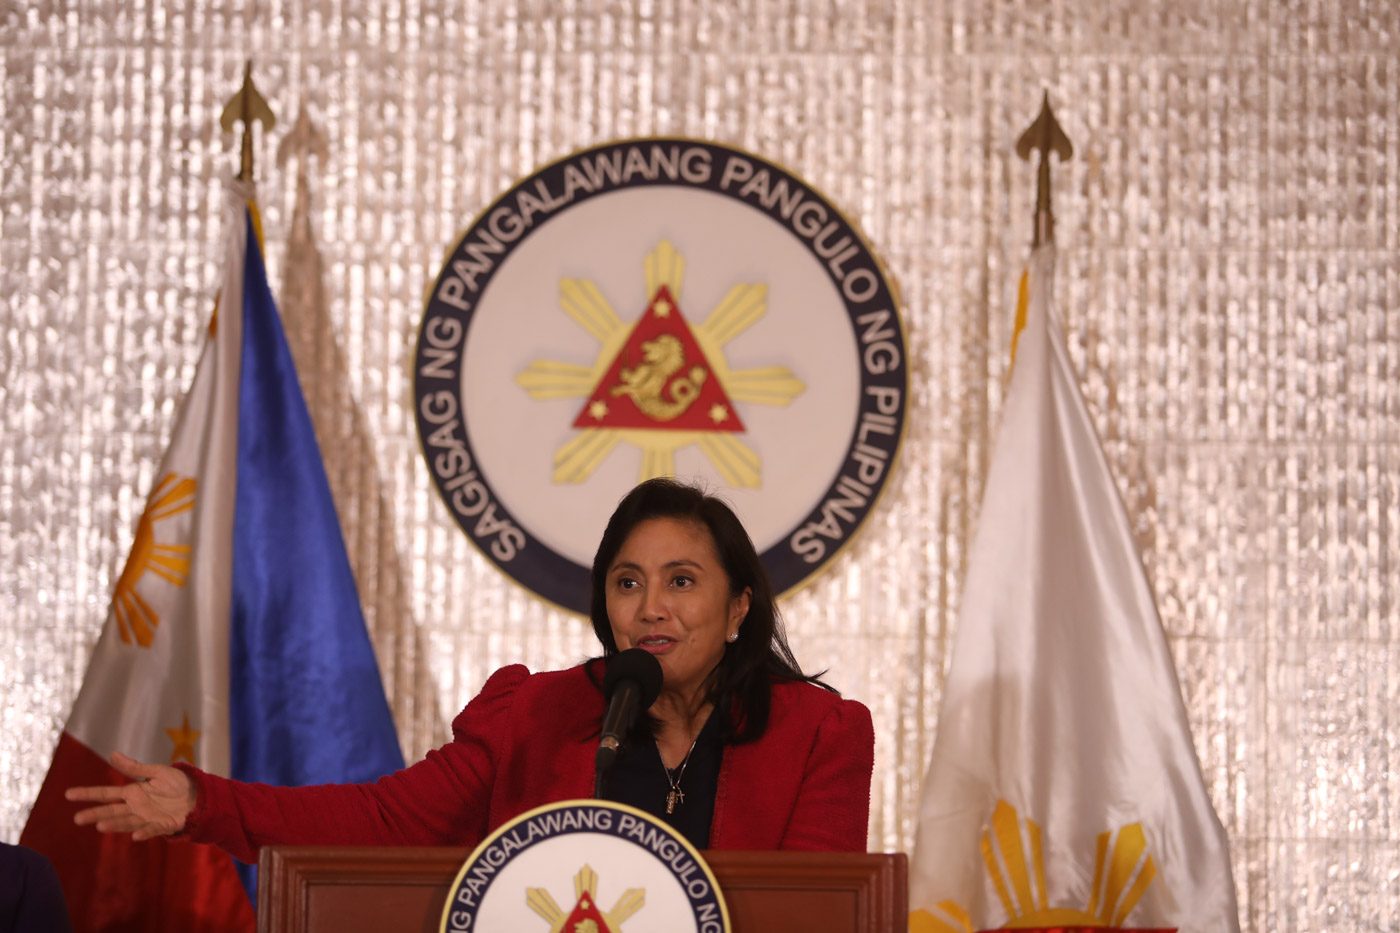 Funny that accusation of stealing would come from Bongbong Marcos – Robredo